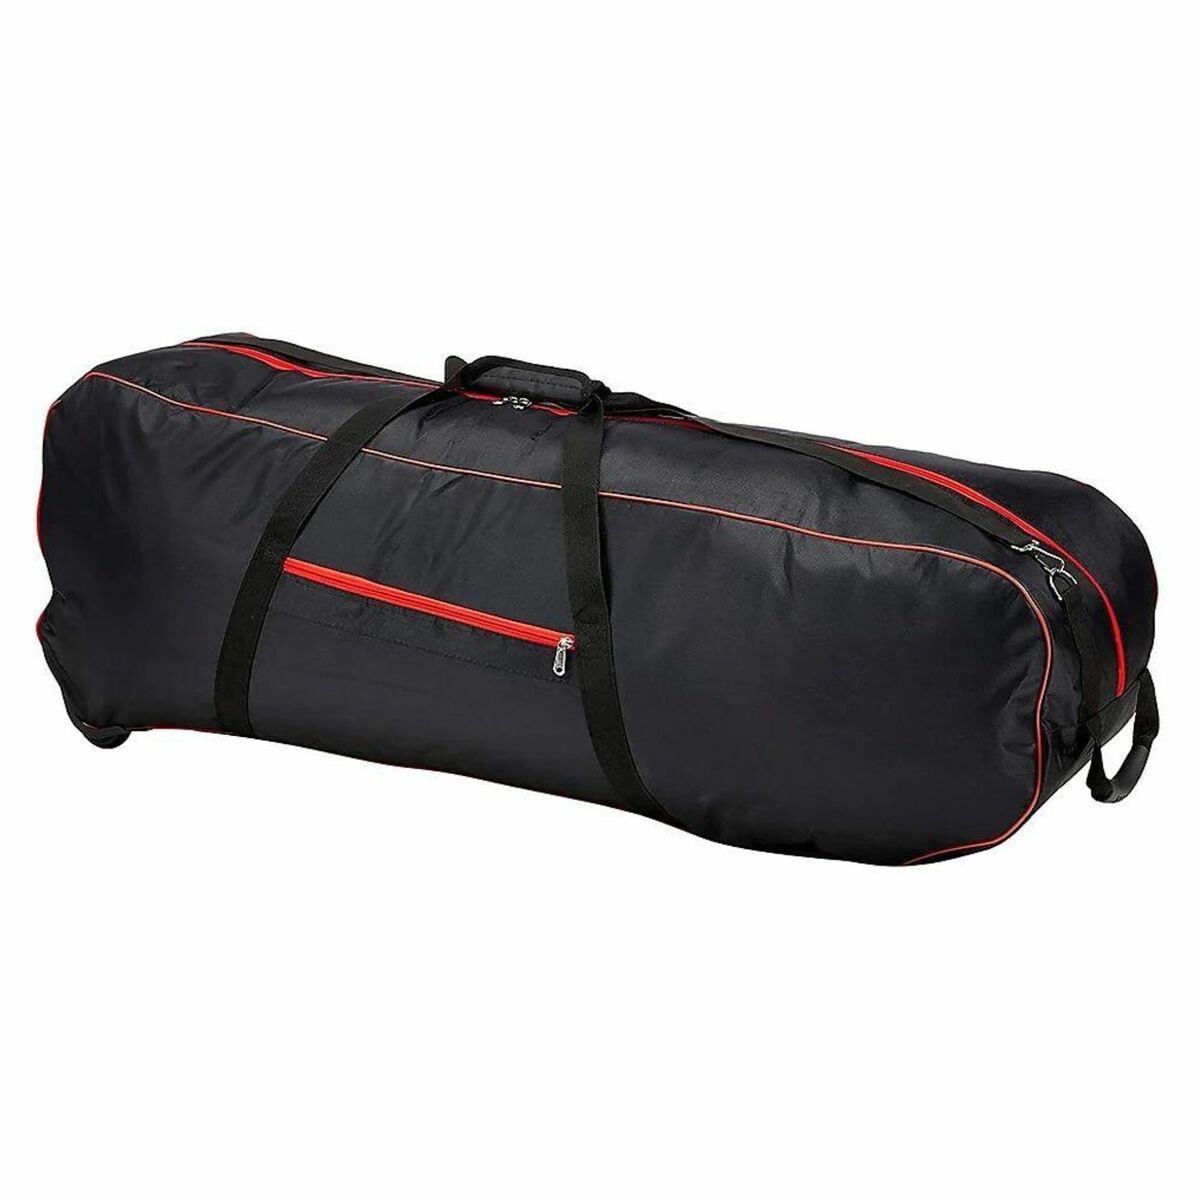 Carry bag WHINCK Scooter, WHINCK, Sports and outdoors, Urban mobility, carry-bag-whinck-scooter, Brand_WHINCK, category-reference-2609, category-reference-2629, category-reference-2904, category-reference-t-19681, category-reference-t-19756, category-reference-t-19876, category-reference-t-21245, category-reference-t-25387, Condition_NEW, deportista / en forma, Price_50 - 100, RiotNook